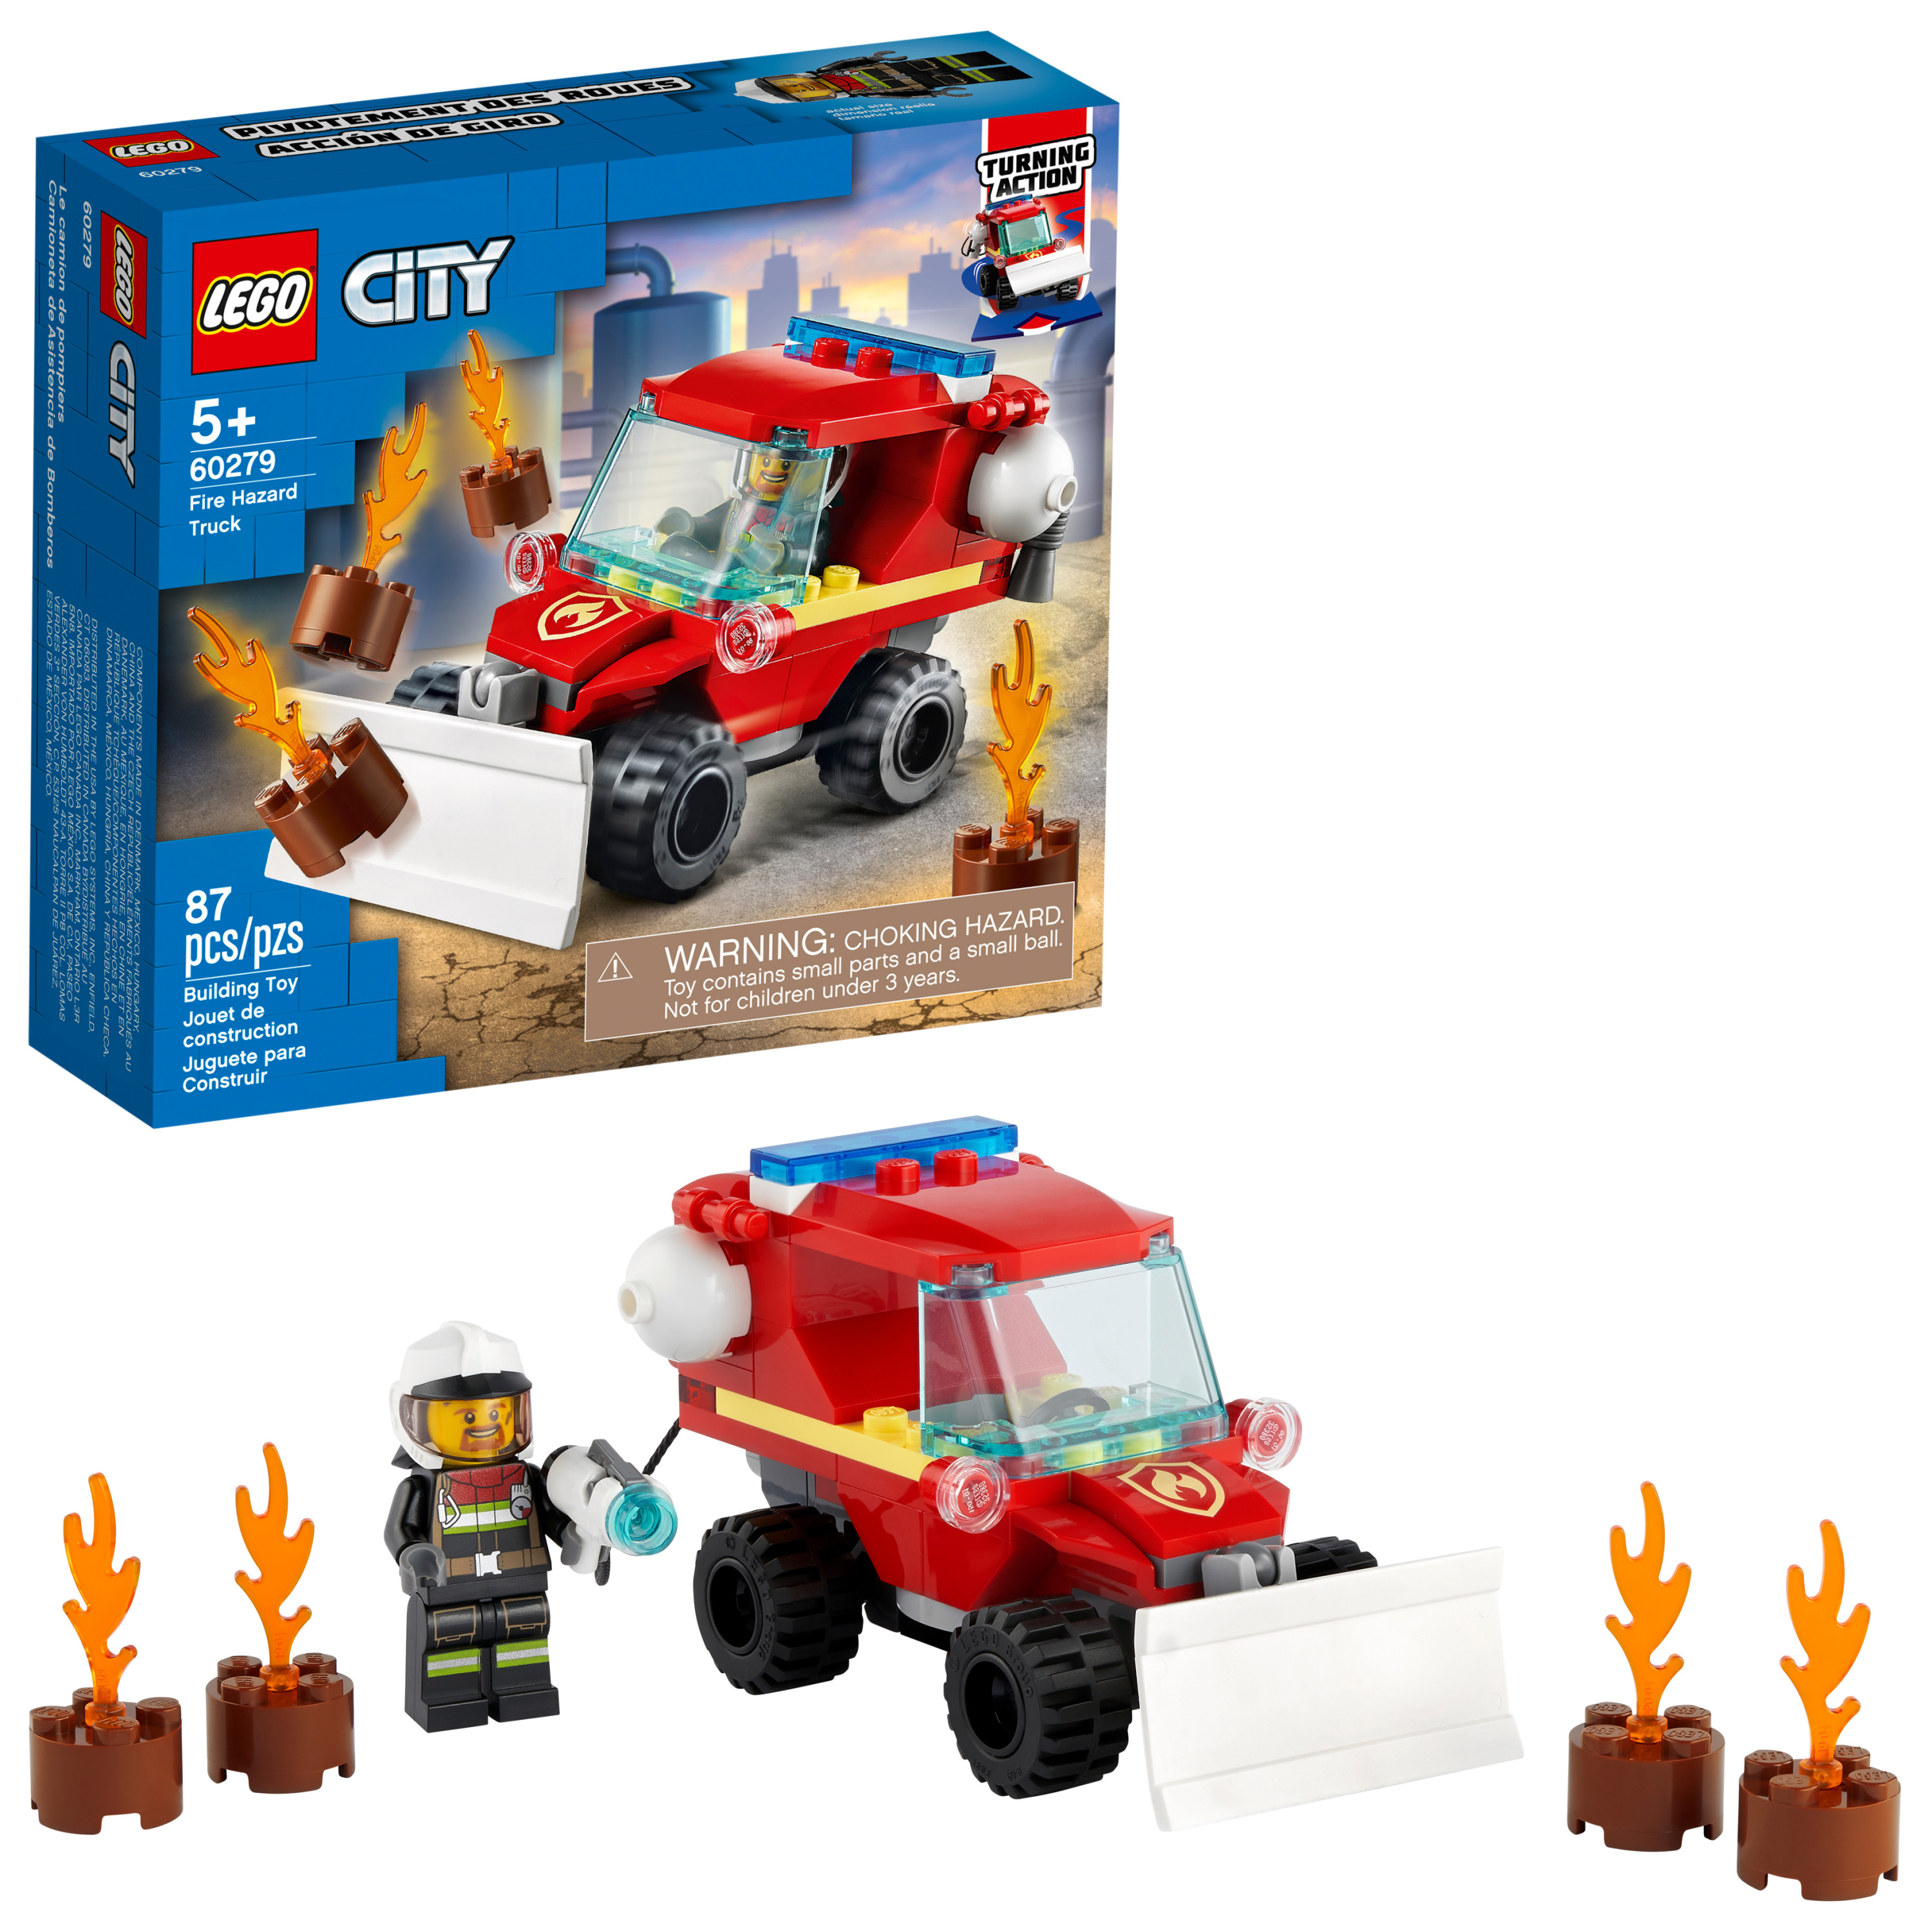 LEGO City Fire Hazard Truck 60279 Building Kit; Firefighter Toy That Makes a Cool Building Toy for Kids, New 2021 (87 Pieces) - image 1 of 8